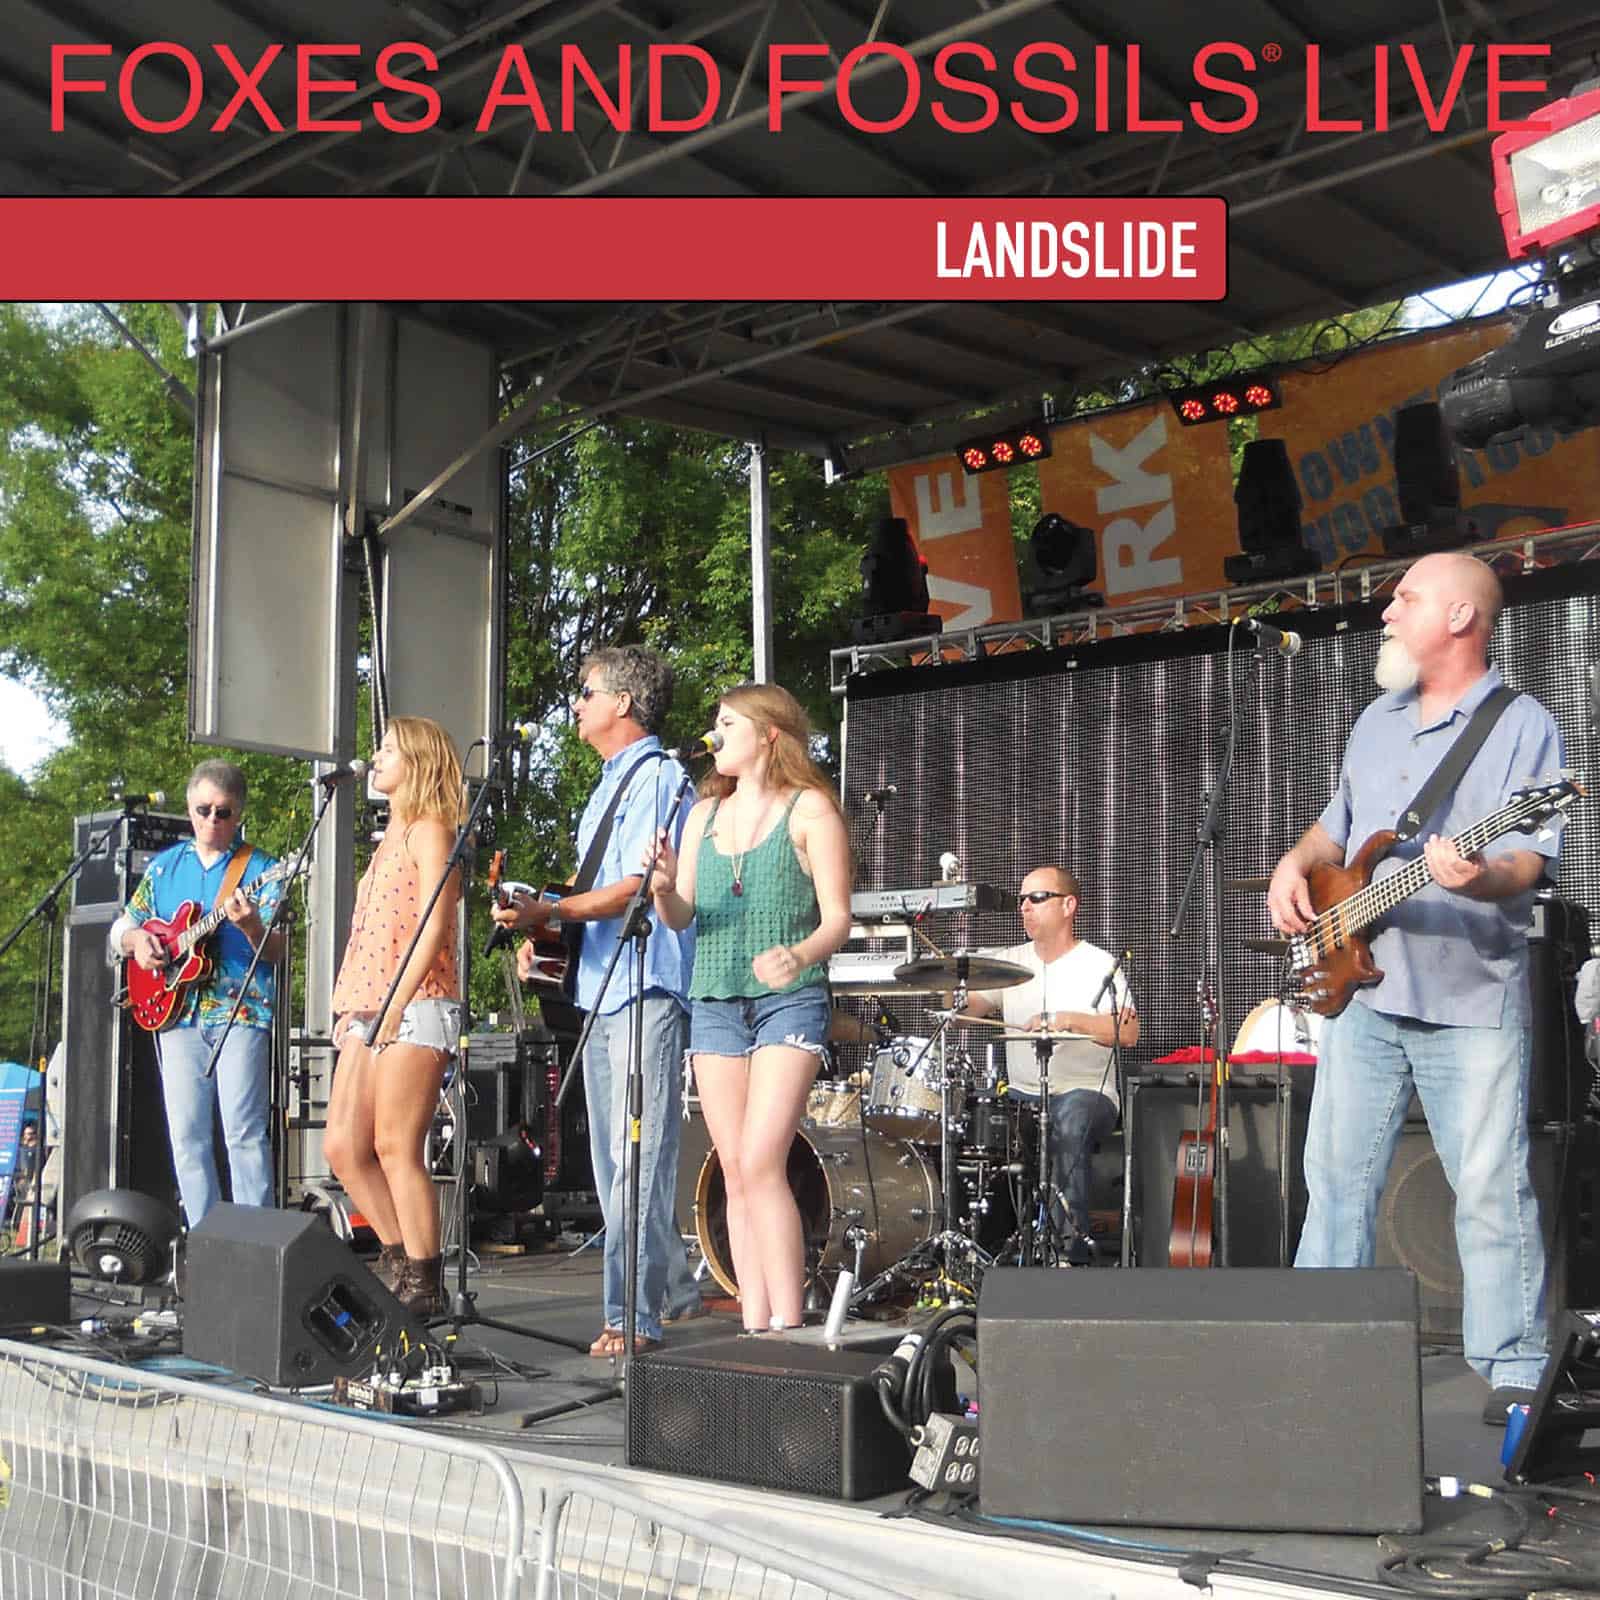 Landslide Track 8 from The Live Album Foxes and Fossils®